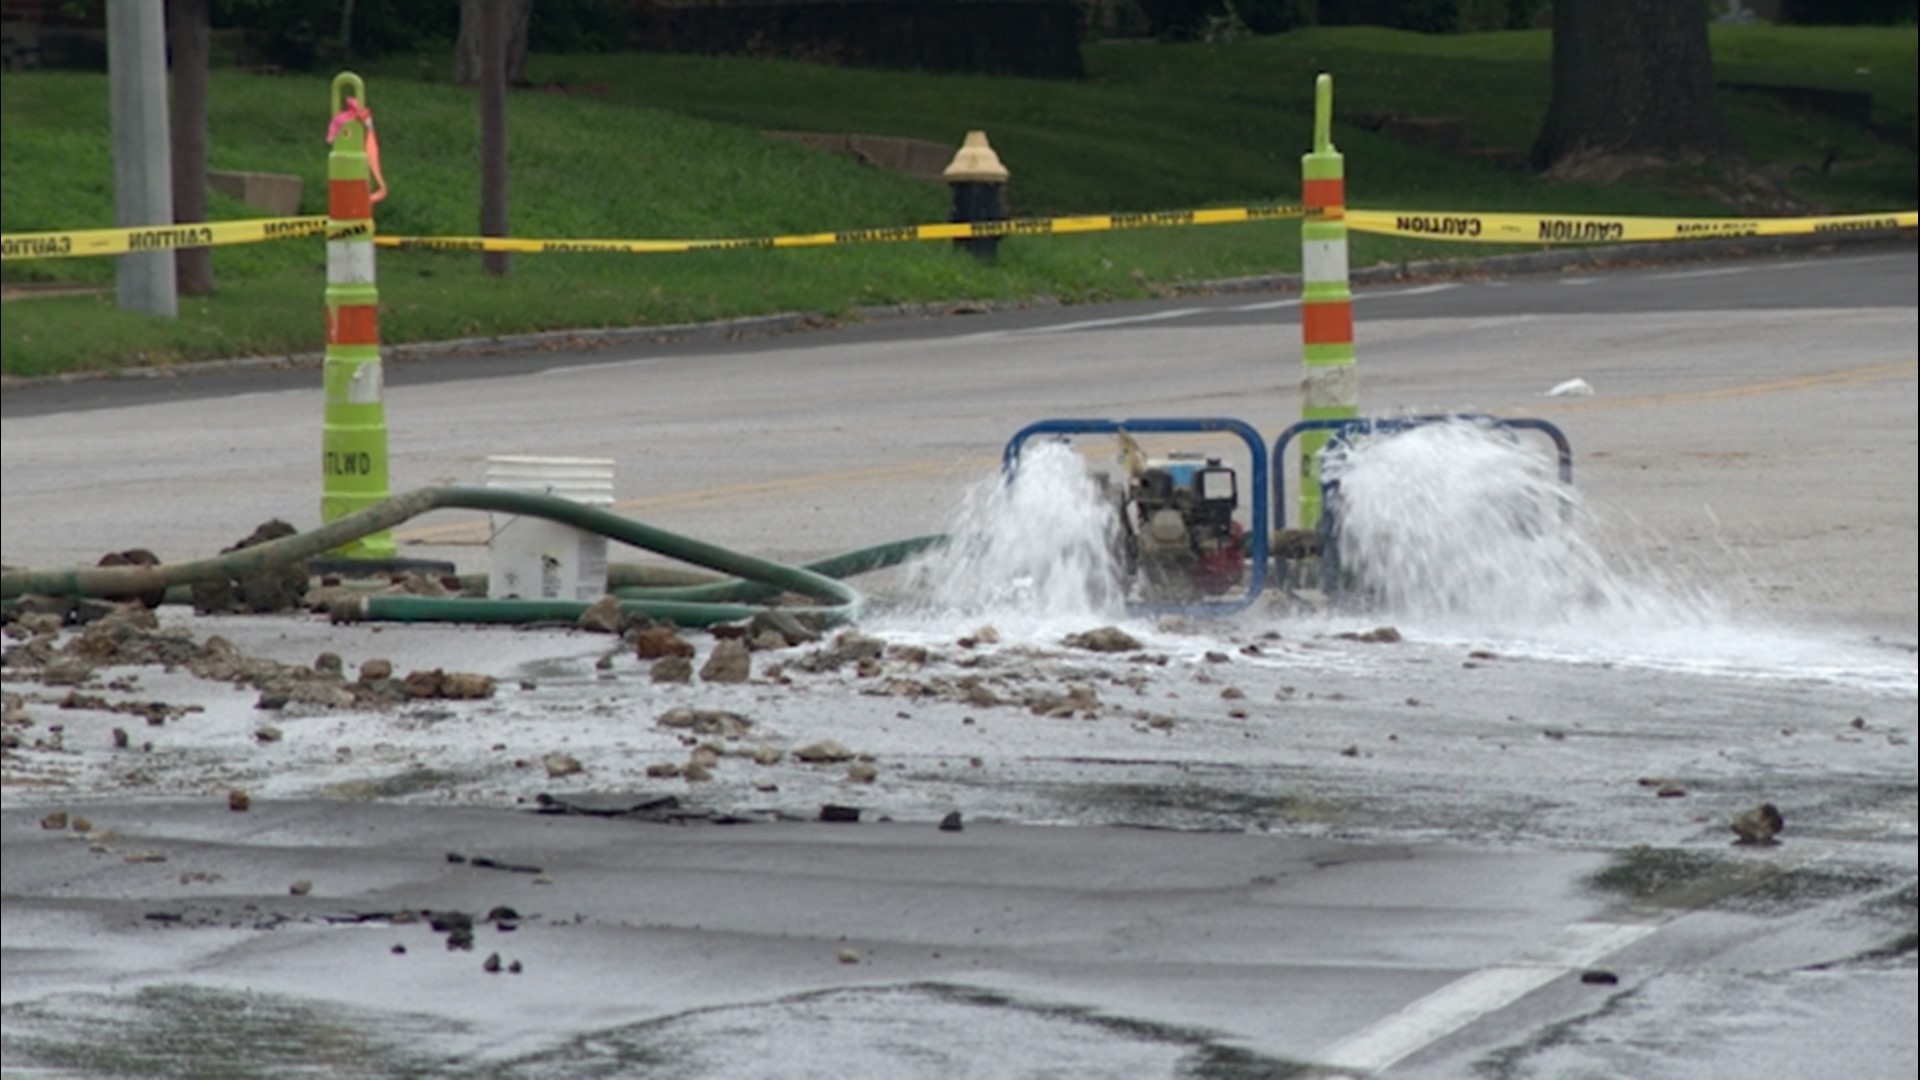 The water main break happened early Wednesday evening at River Des Peres Boulevard and Chippewa Street.